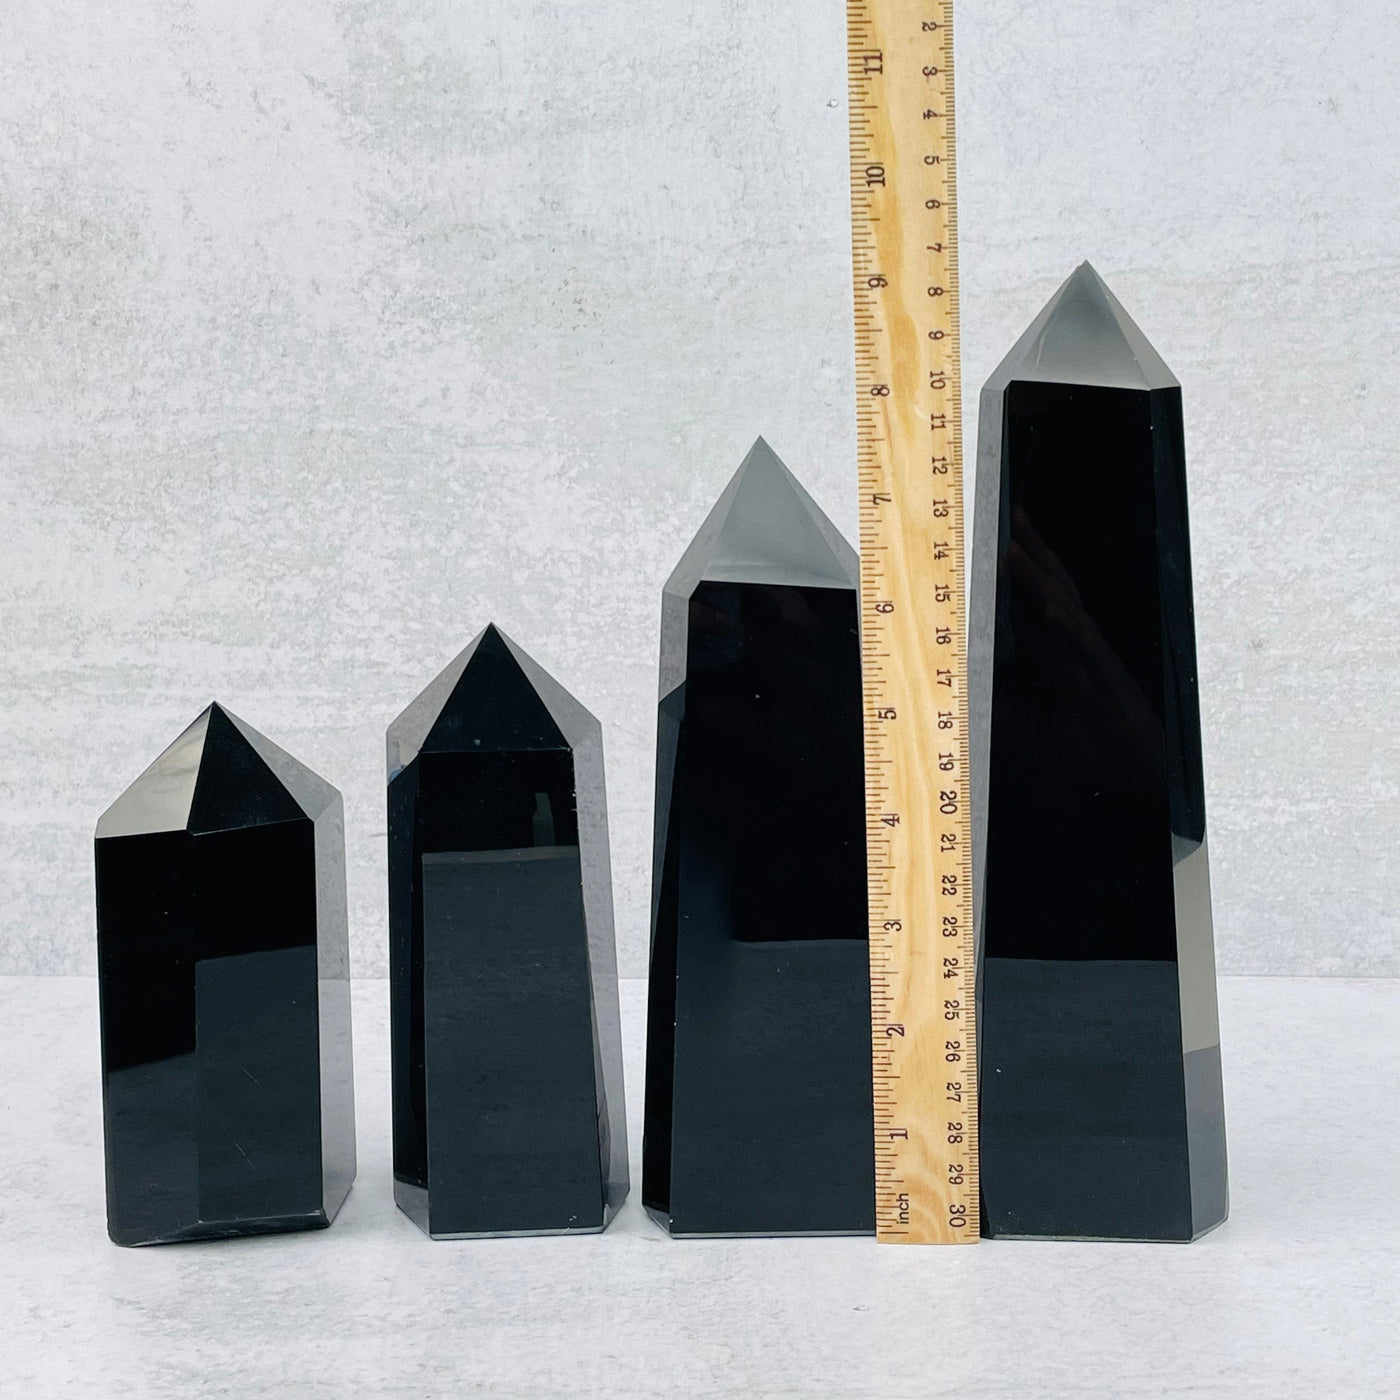 black obsidian towers next to a ruler for size reference 